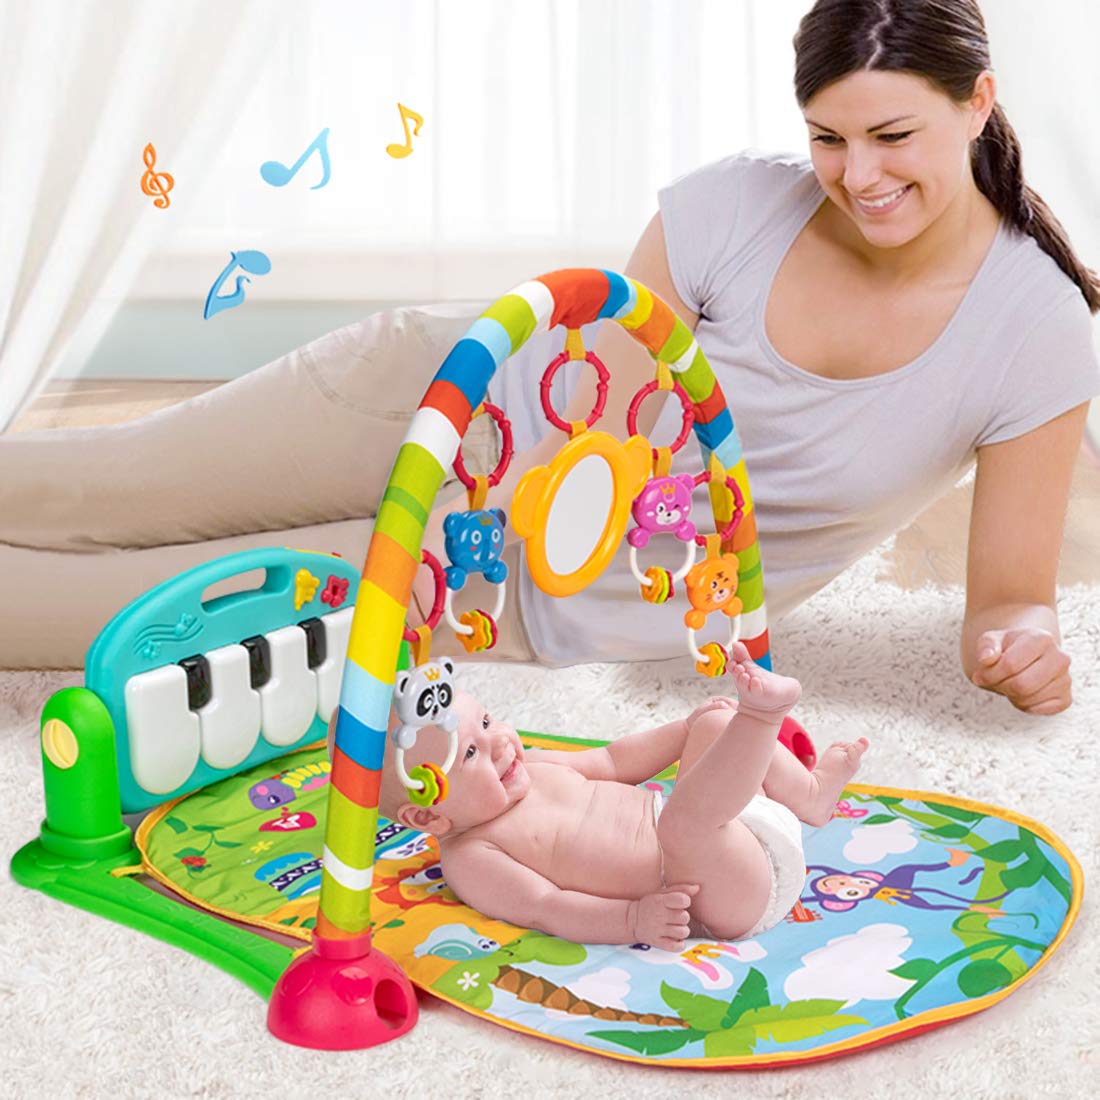 UNIH Baby Gym Play Mat and Play Piano Gym with Tummy Time Mat, Musical Light Activity Center for Infants Toddlers, Birthday Gift Play Mat for Newborn